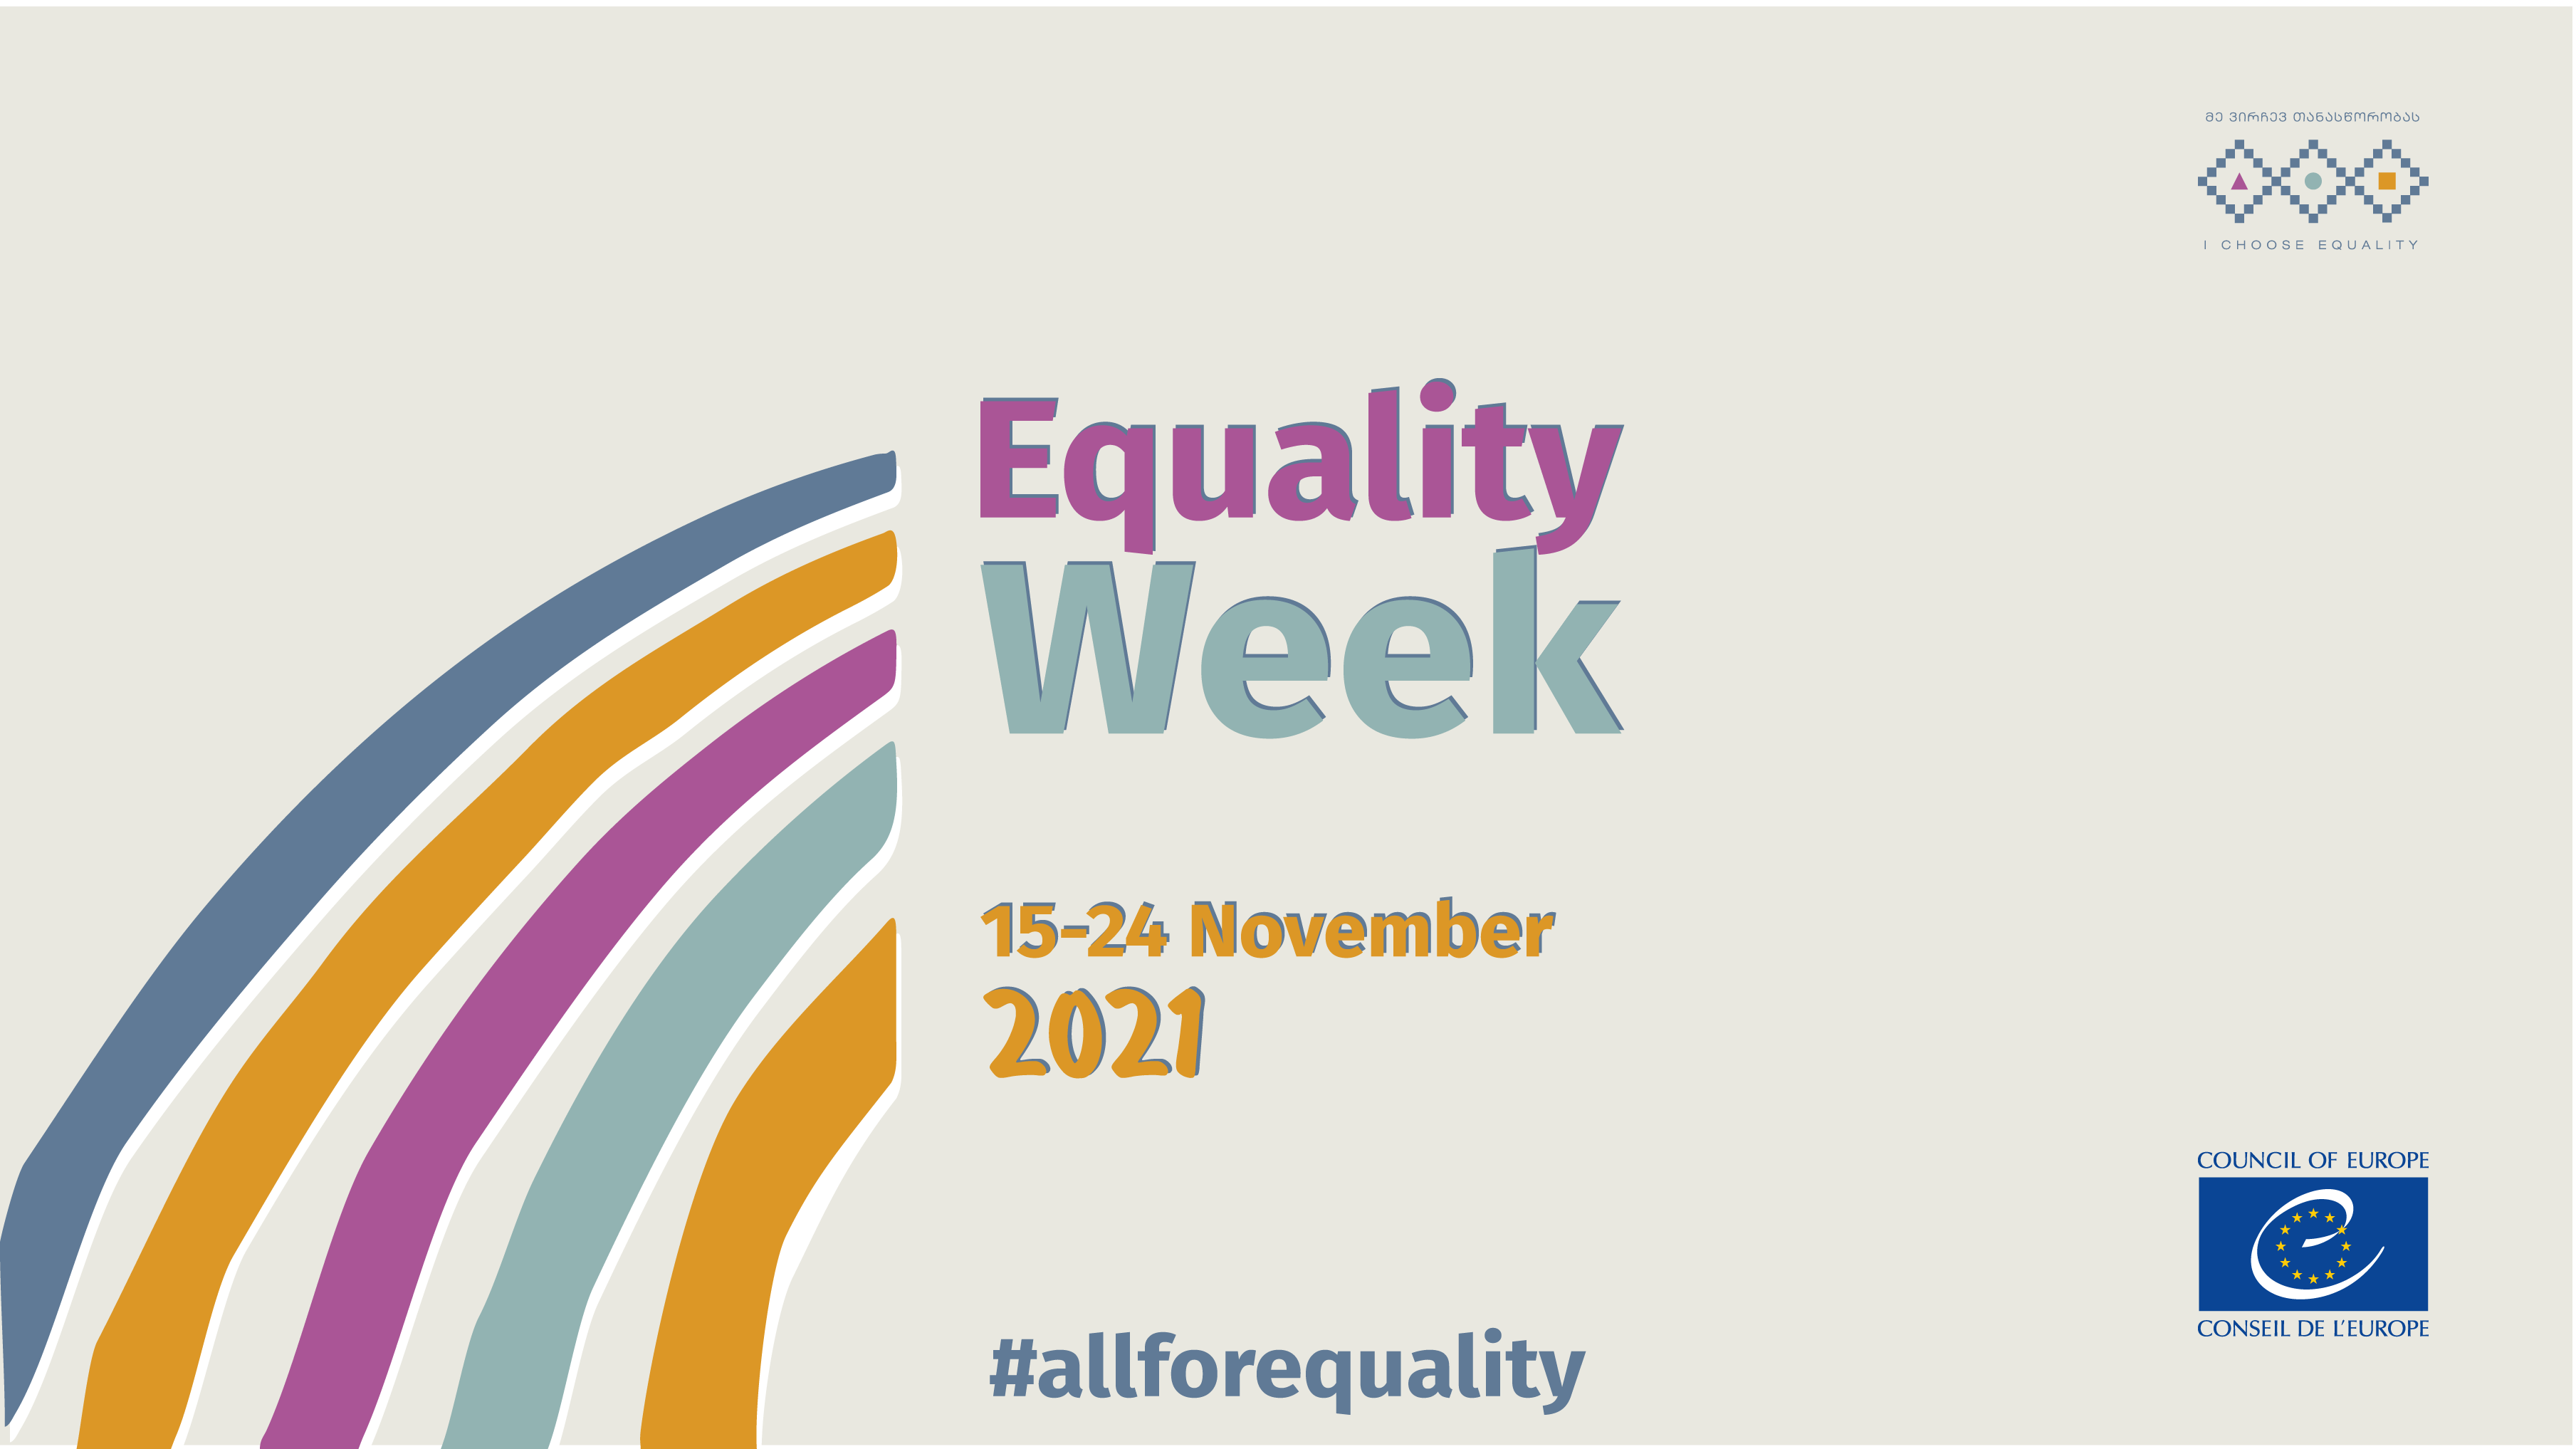 The Equality Week is back with creative activities in Georgia